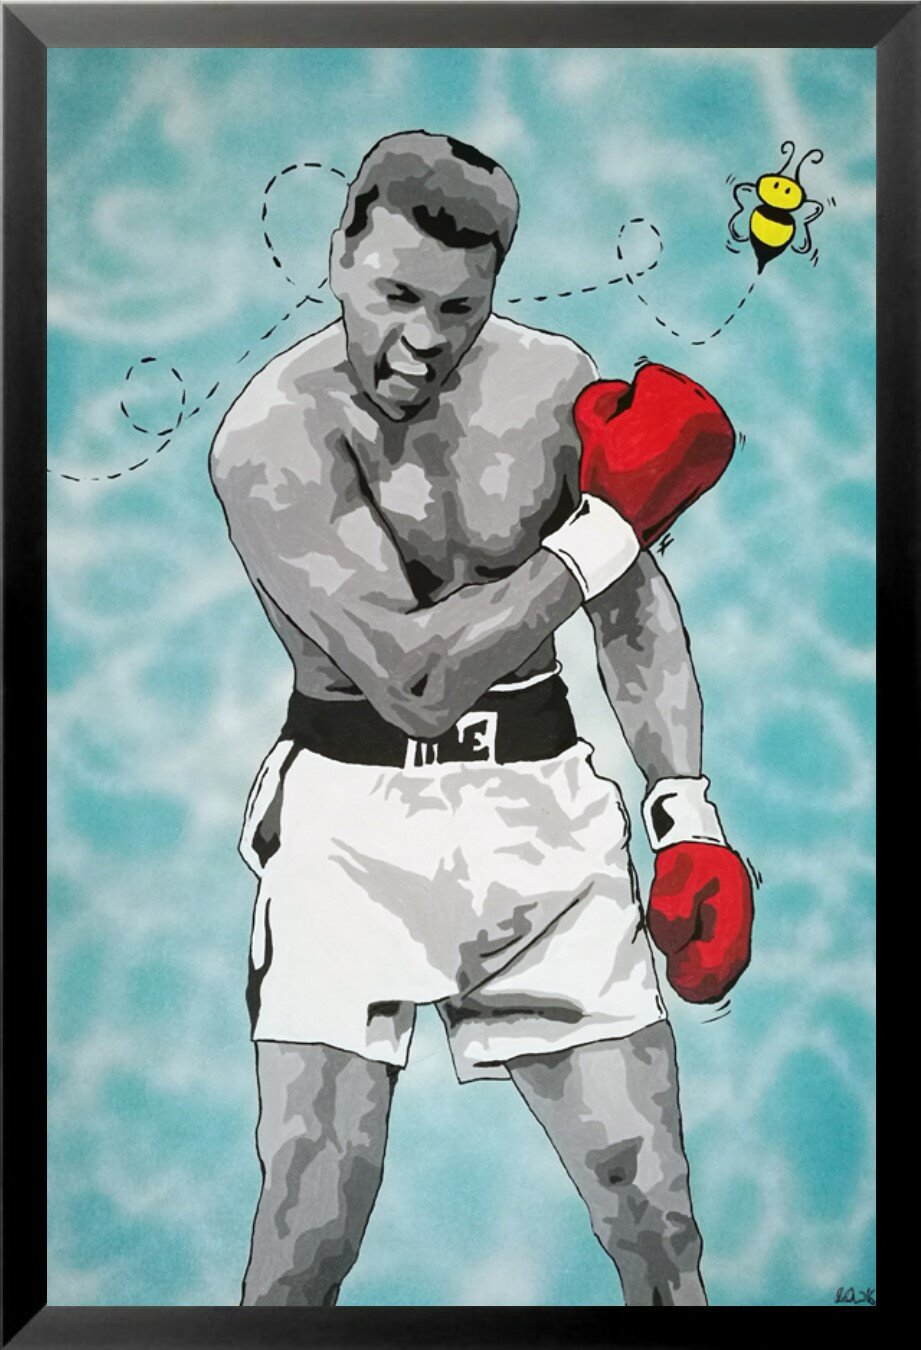 Buy Art For Less Muhammad Ali Boxing Legend Float Like A Butterfly Sting Like A Bee Picture Frame Graphic Art Wayfair